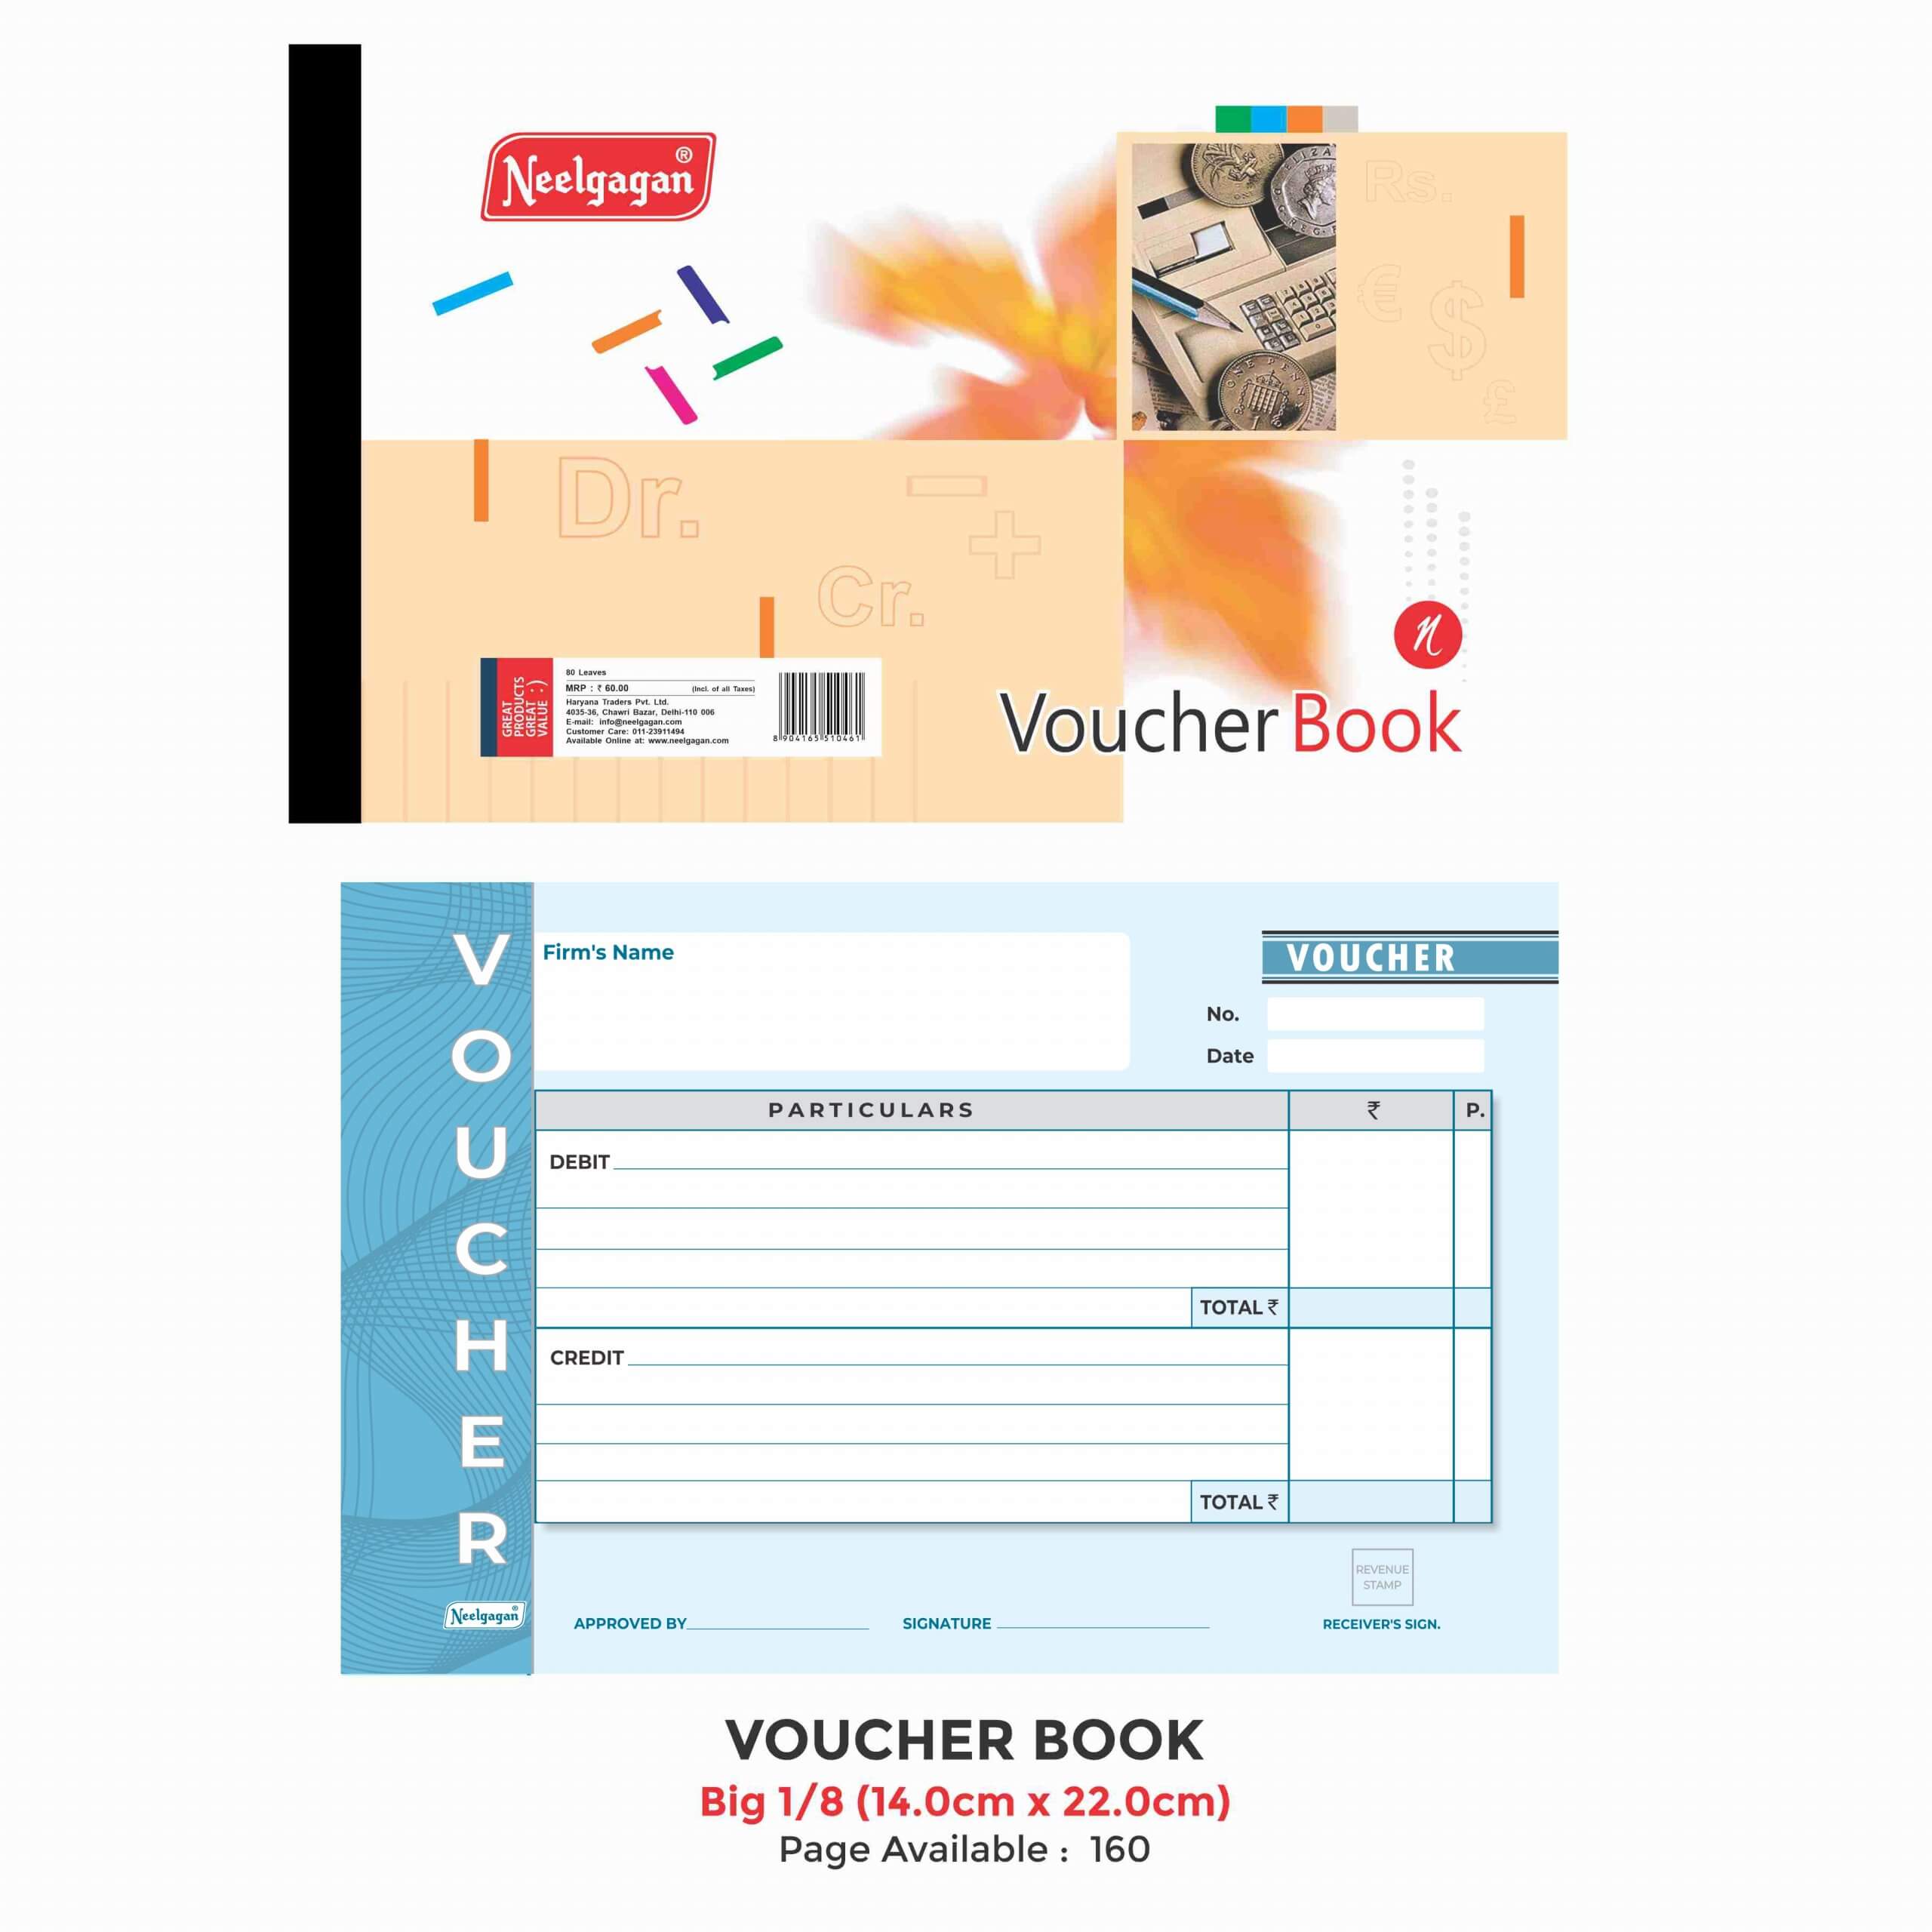 Voucher Book, 160 Pages (Small - 1/12 & Big - 1/8)